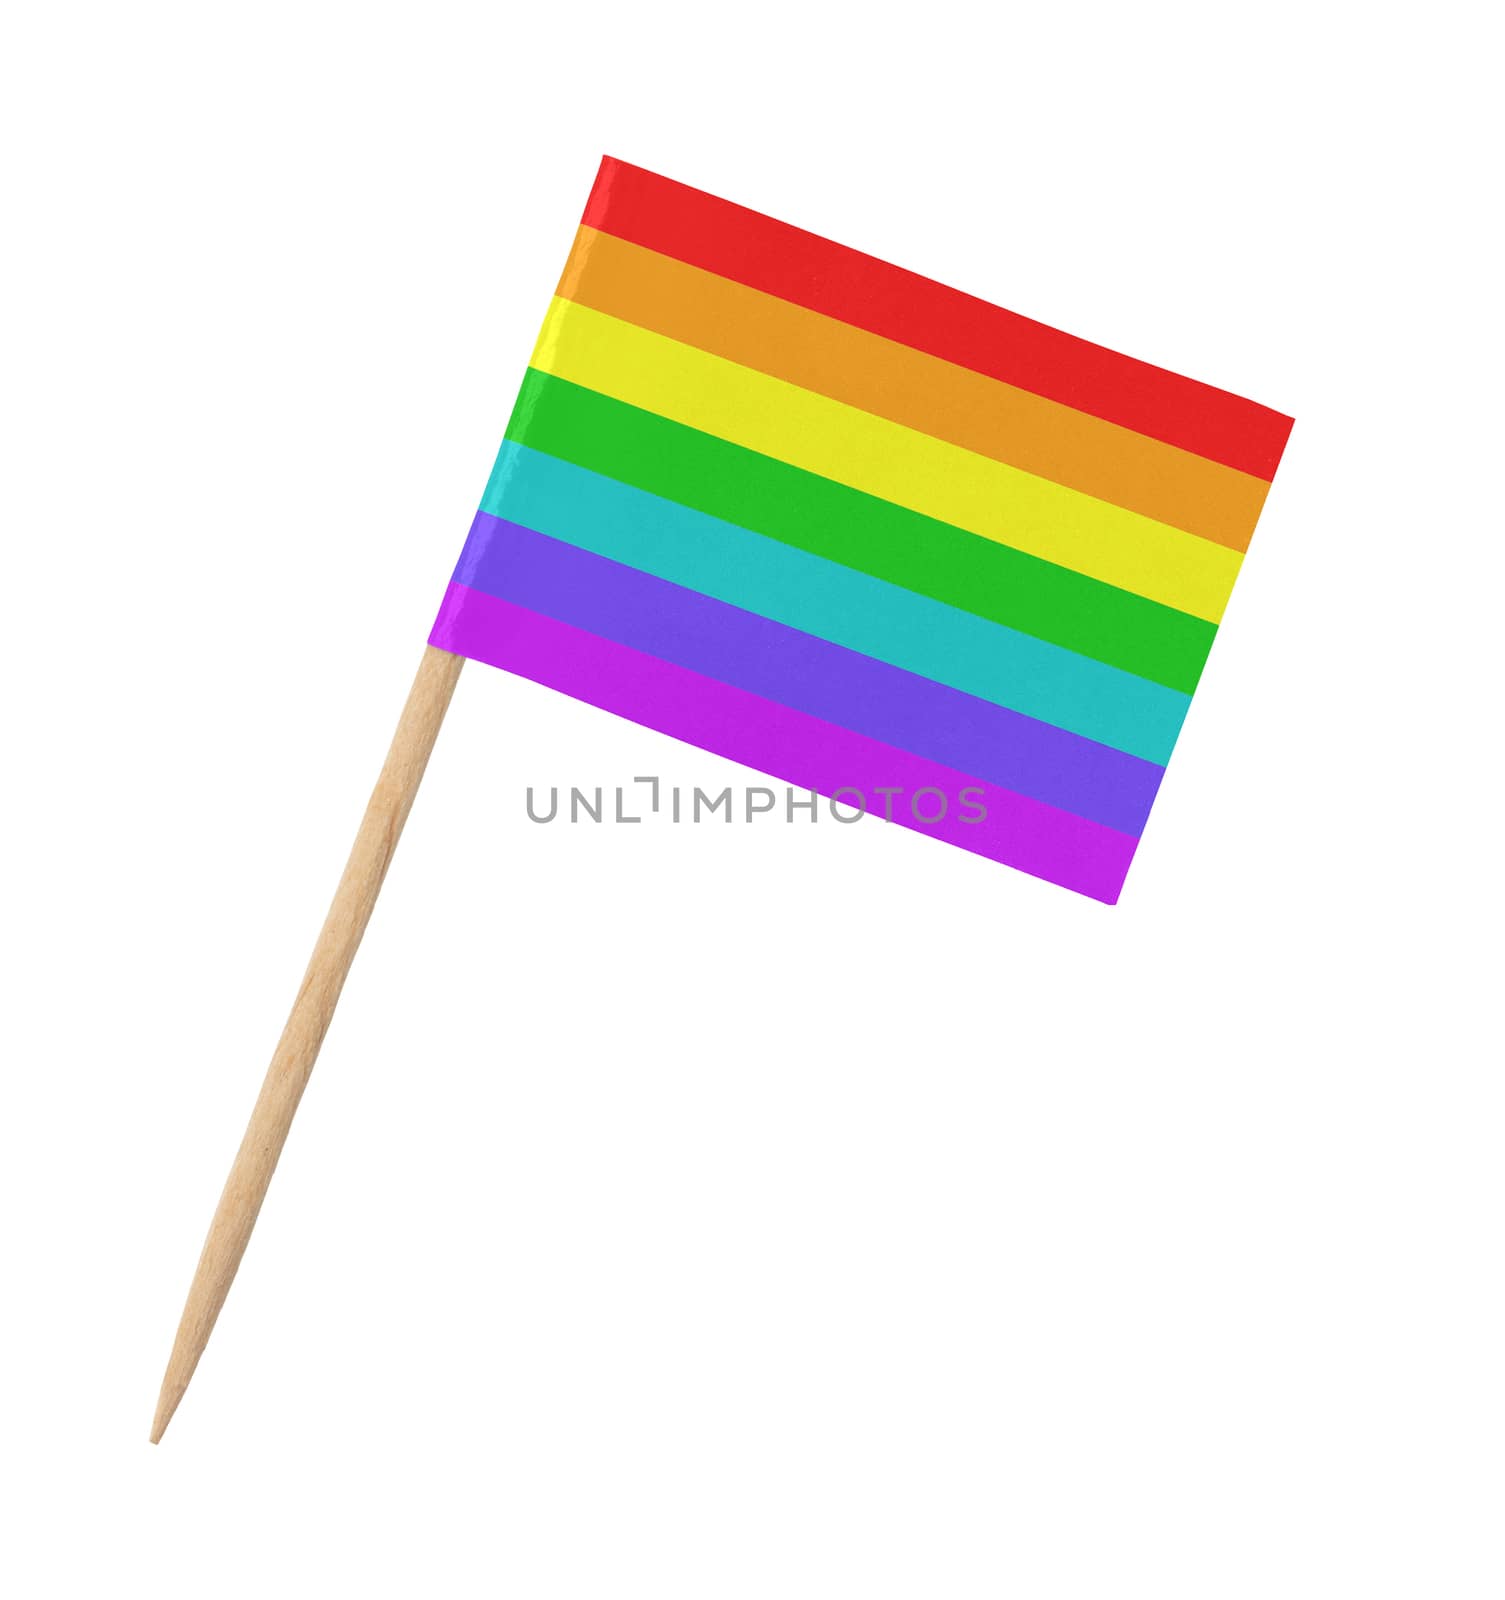 Small paper rainbow flag on wooden stick by michaklootwijk